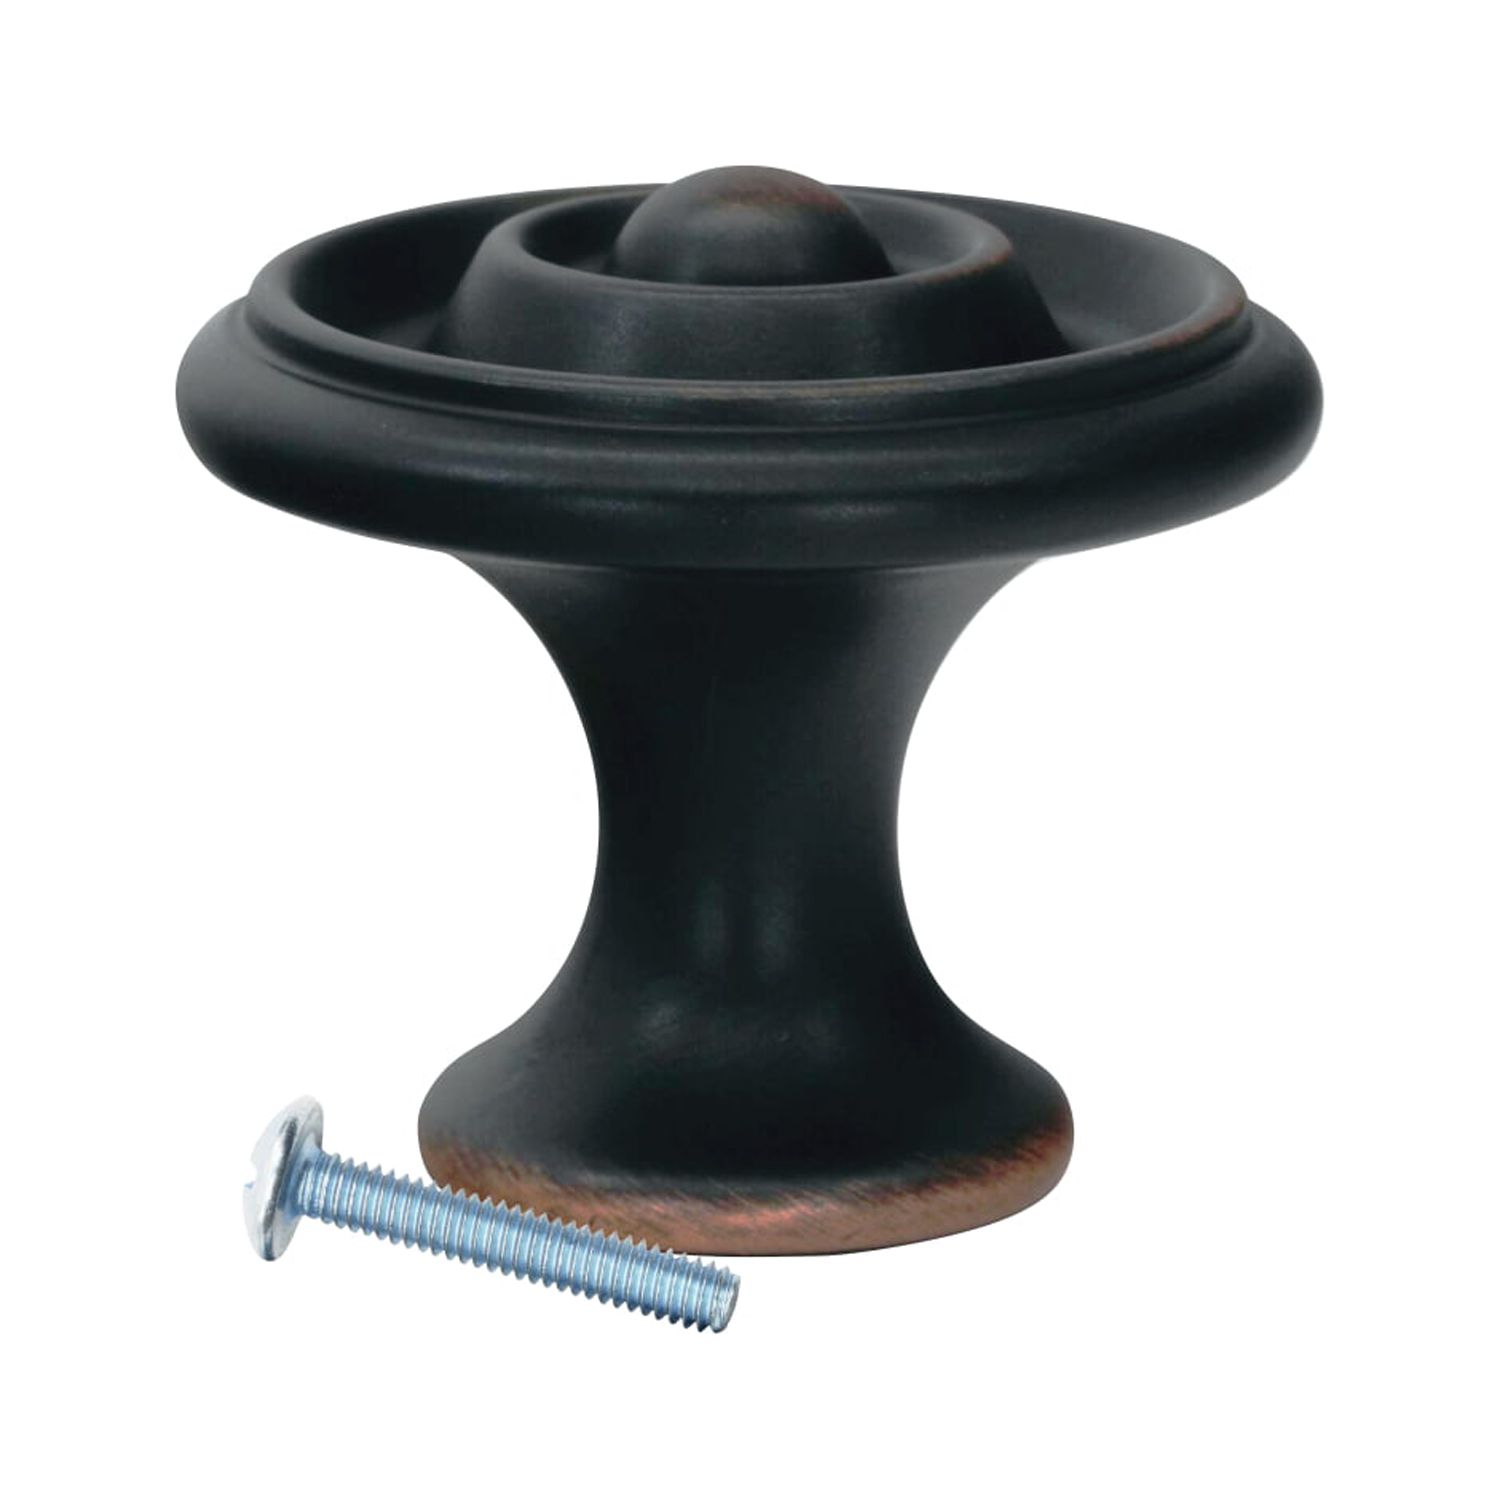 Orbit Ring Style Brushed Oil-Rubbed Bronze Cabinet Hardware Knob, 1-11/16 Inch Diameter - image 1 of 2